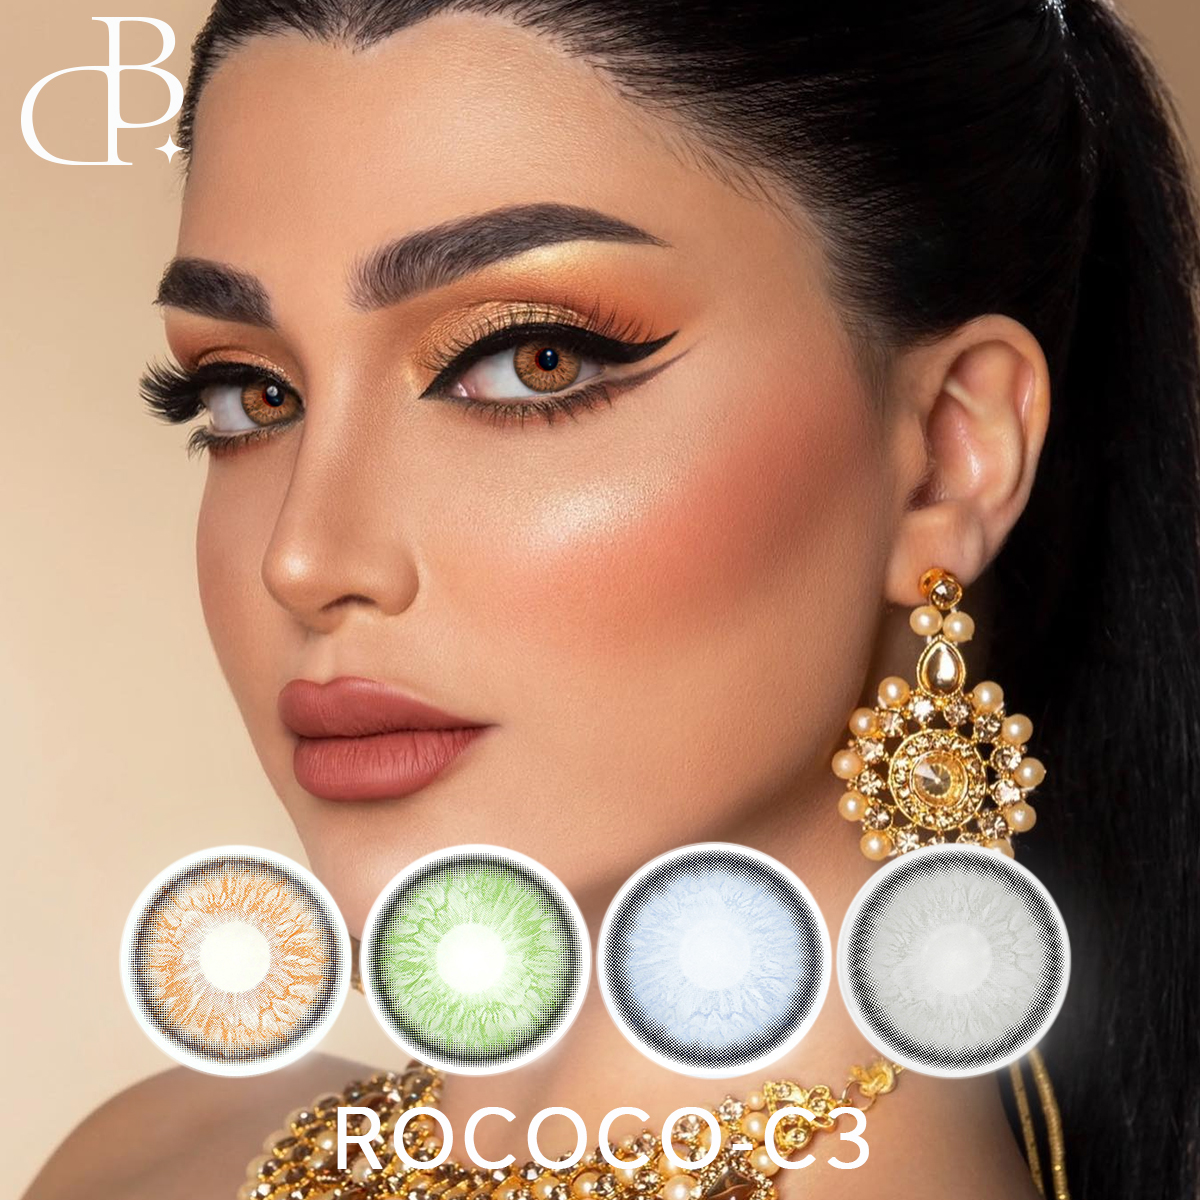 https://www.dblenses.com/rococo-3-new-looking-cosmetic-wholesale-color-contact-lens-cheap-soft-yearly-eye-colored-lens-lenses-product/